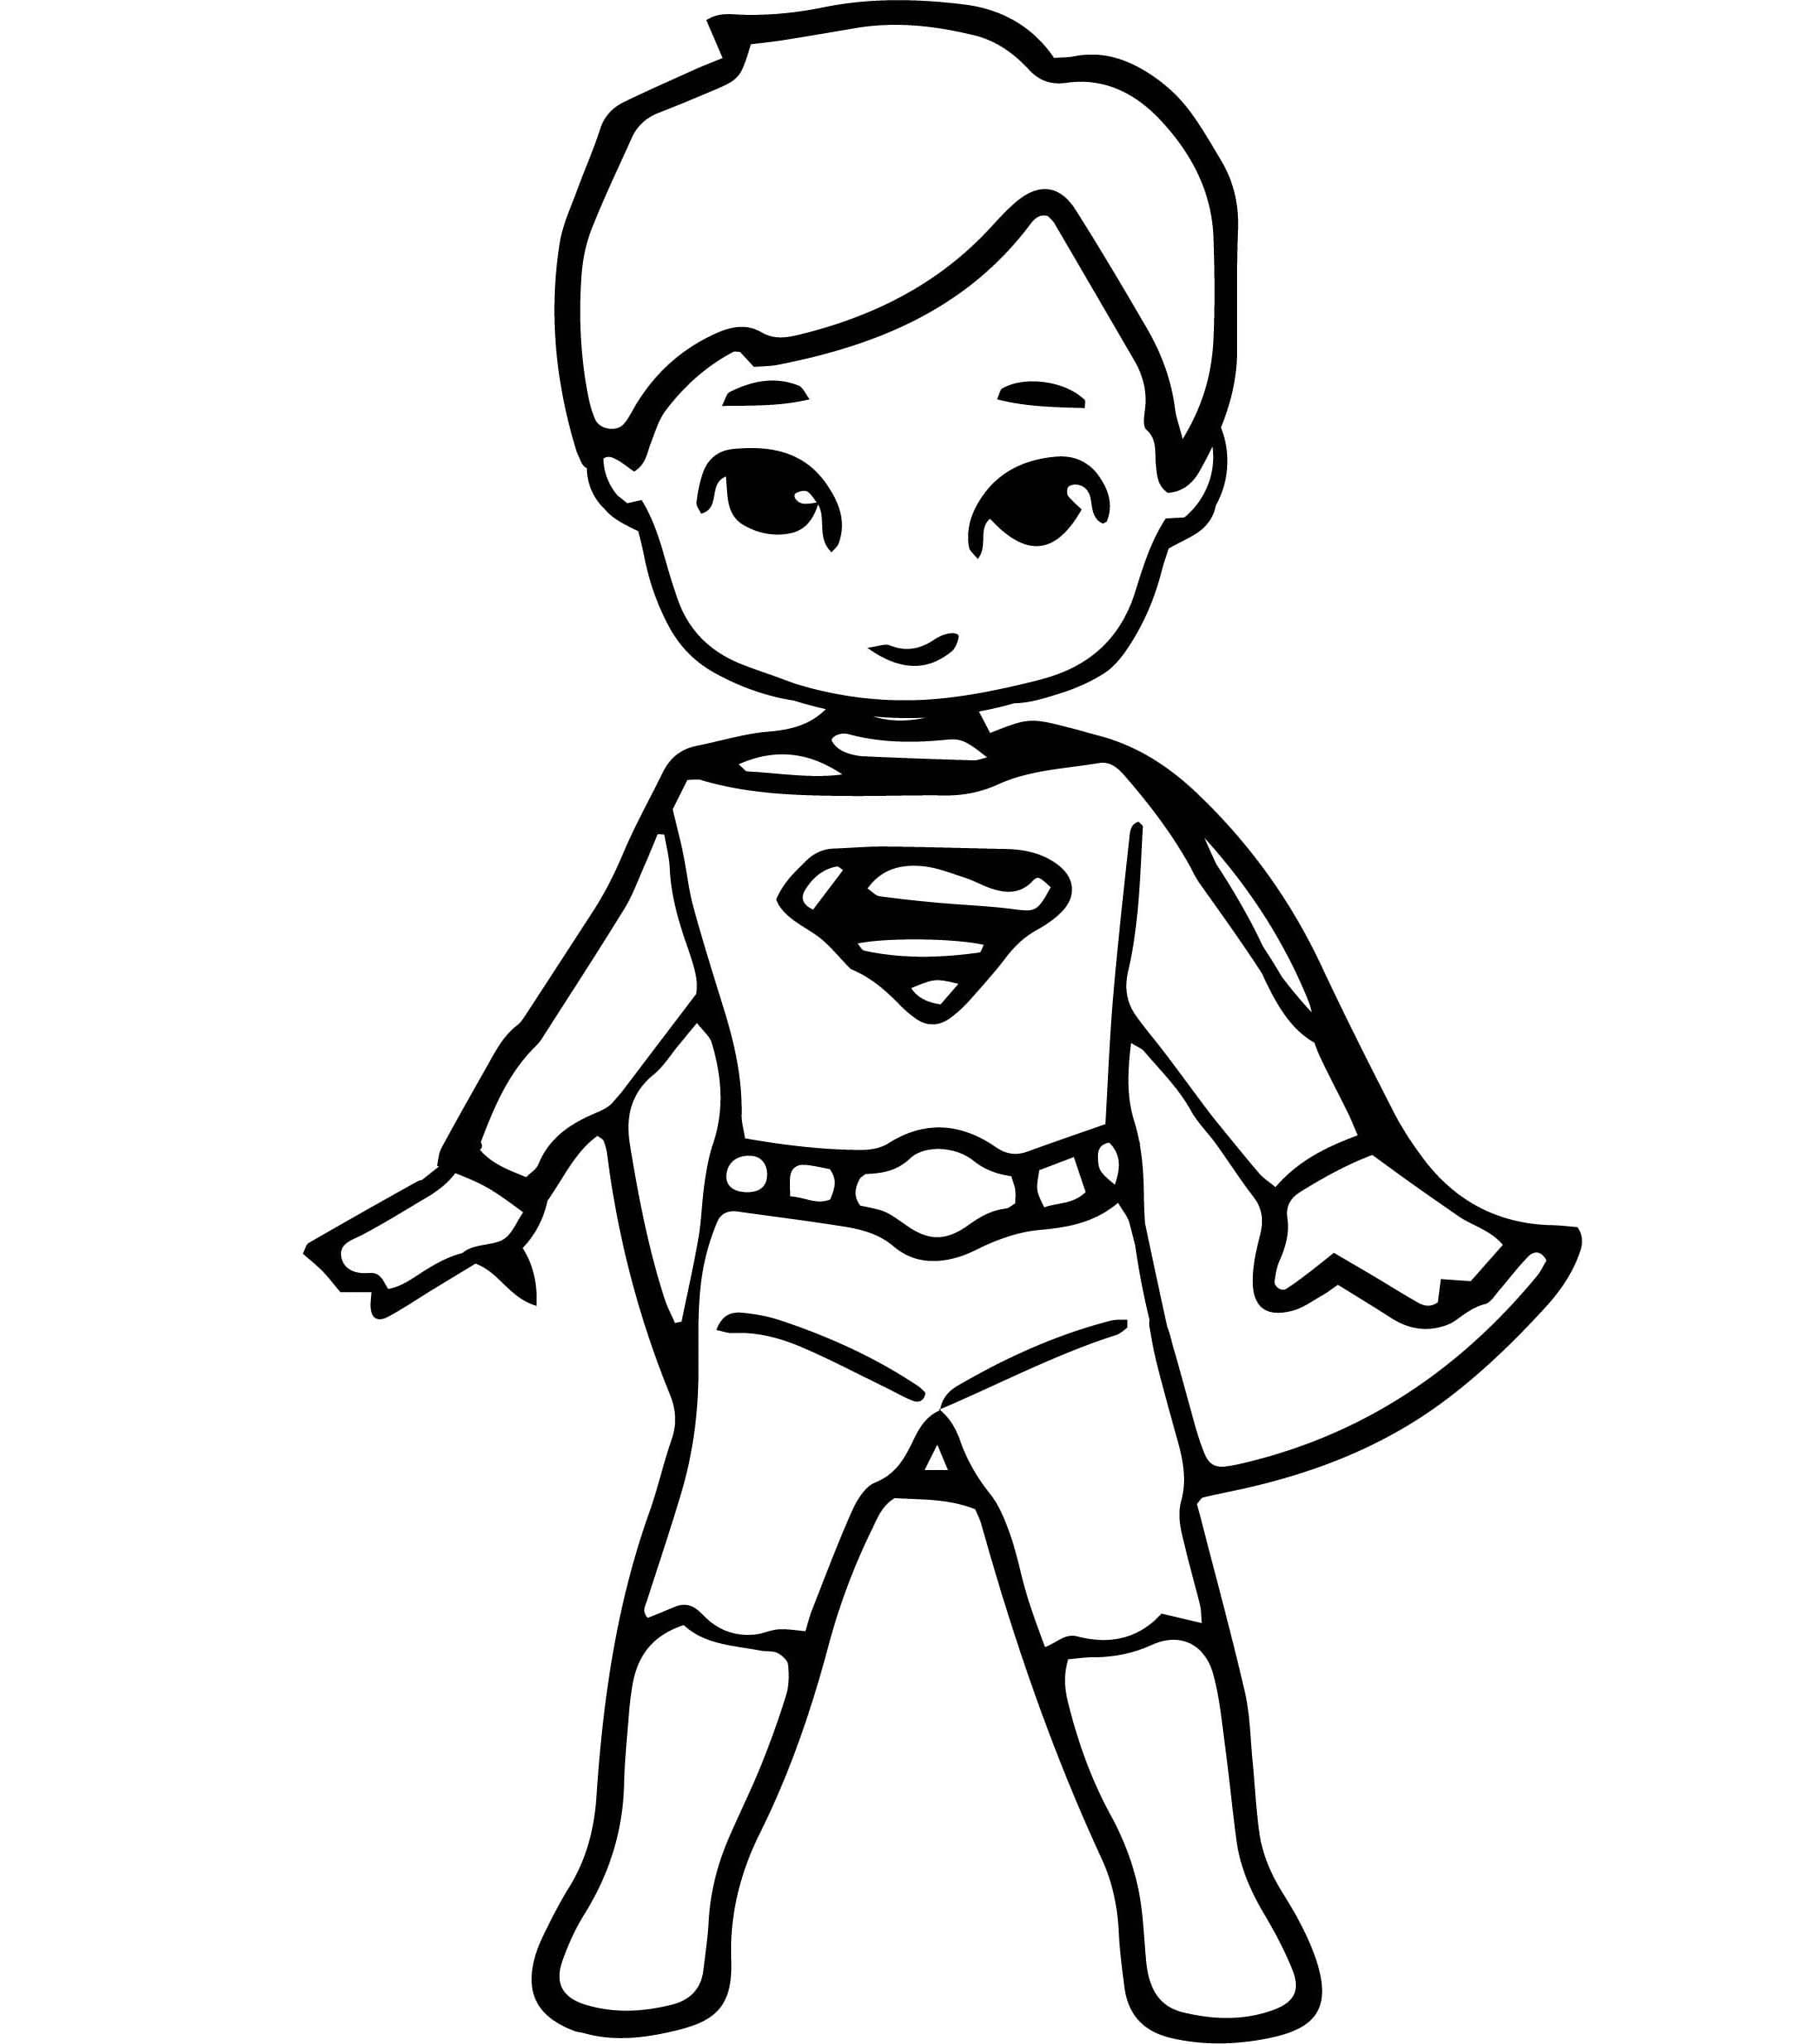 Cute superman coloring page